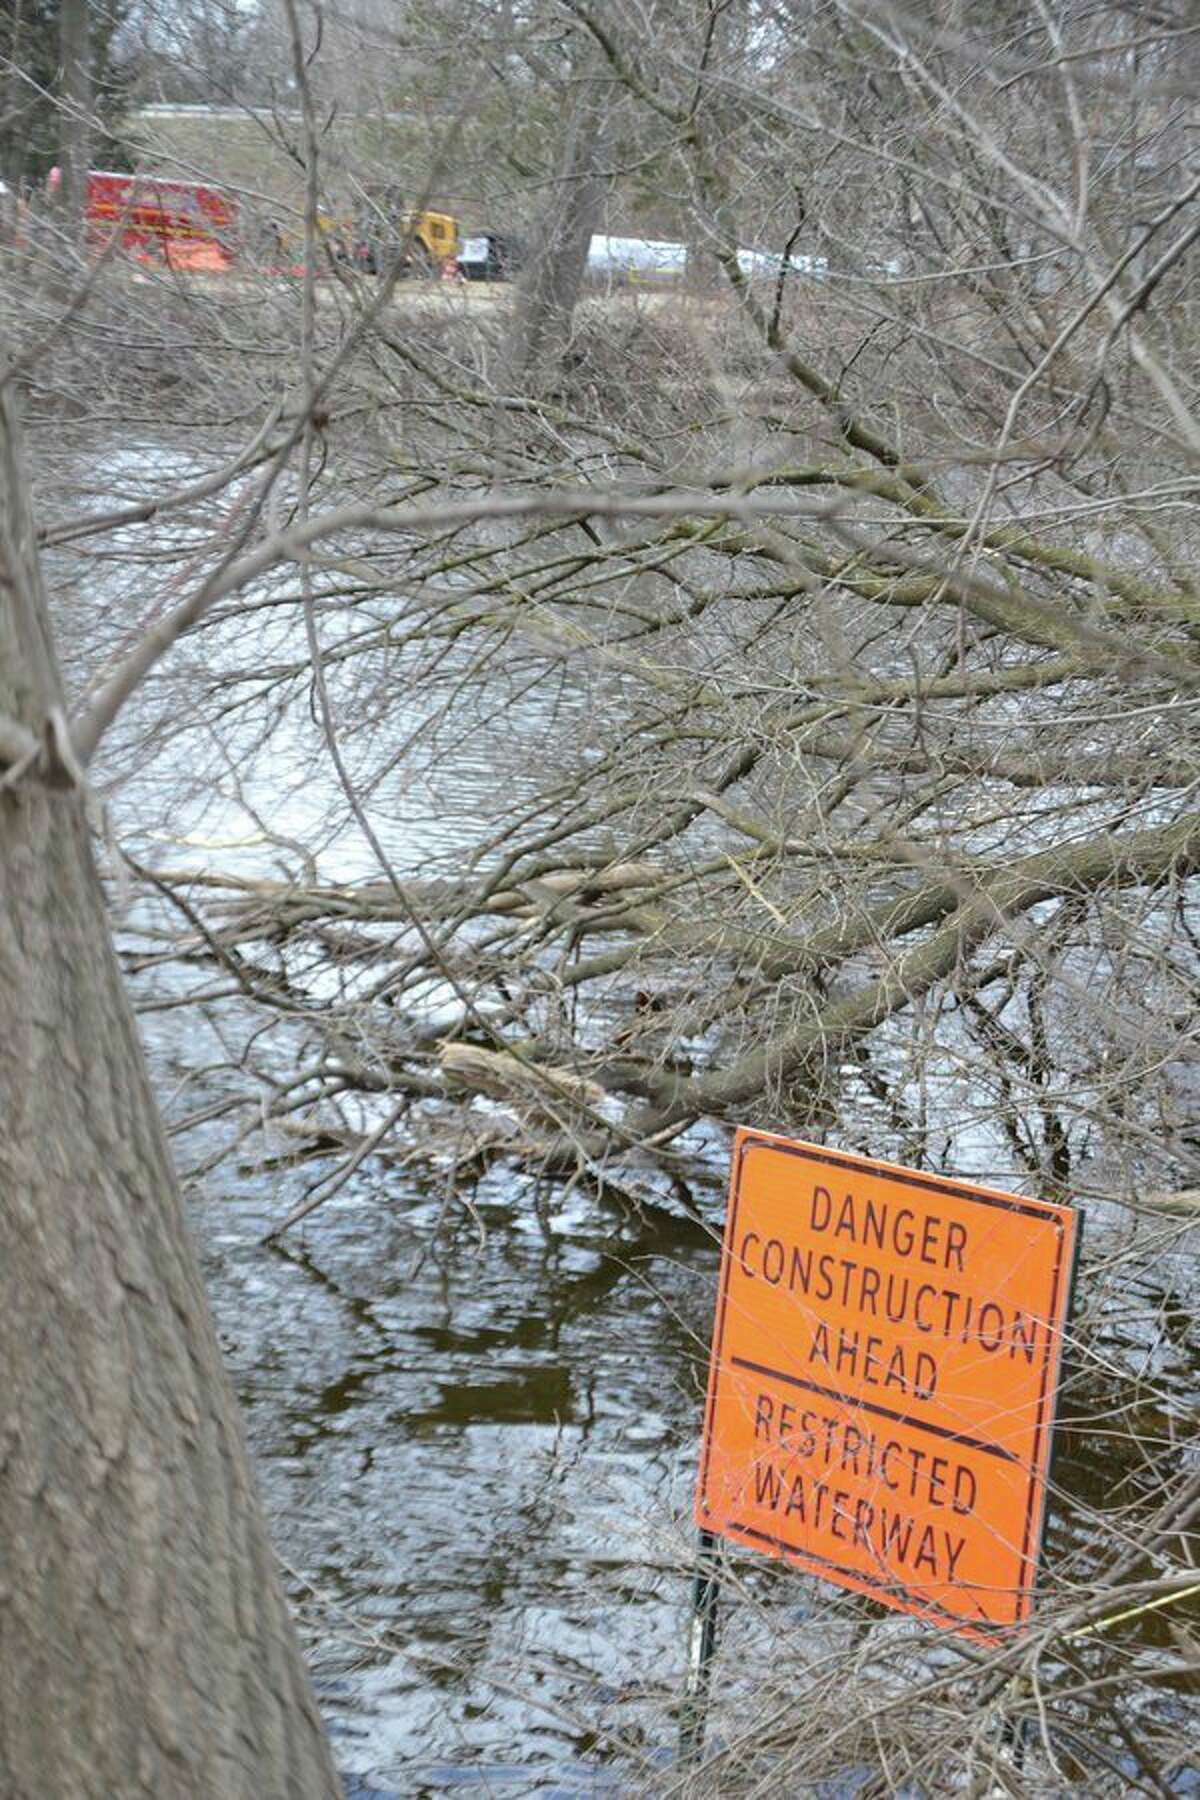 This sign on the Tittabawassee River, just upstream of the Tridge, alerts boaters and anglers to the fact that the river has been narrowed in the area of the Robertson Bridge over M-20 while the bridge is being rebuilt (as seen in the background). (Steve Griffin/Hearst Michigan)